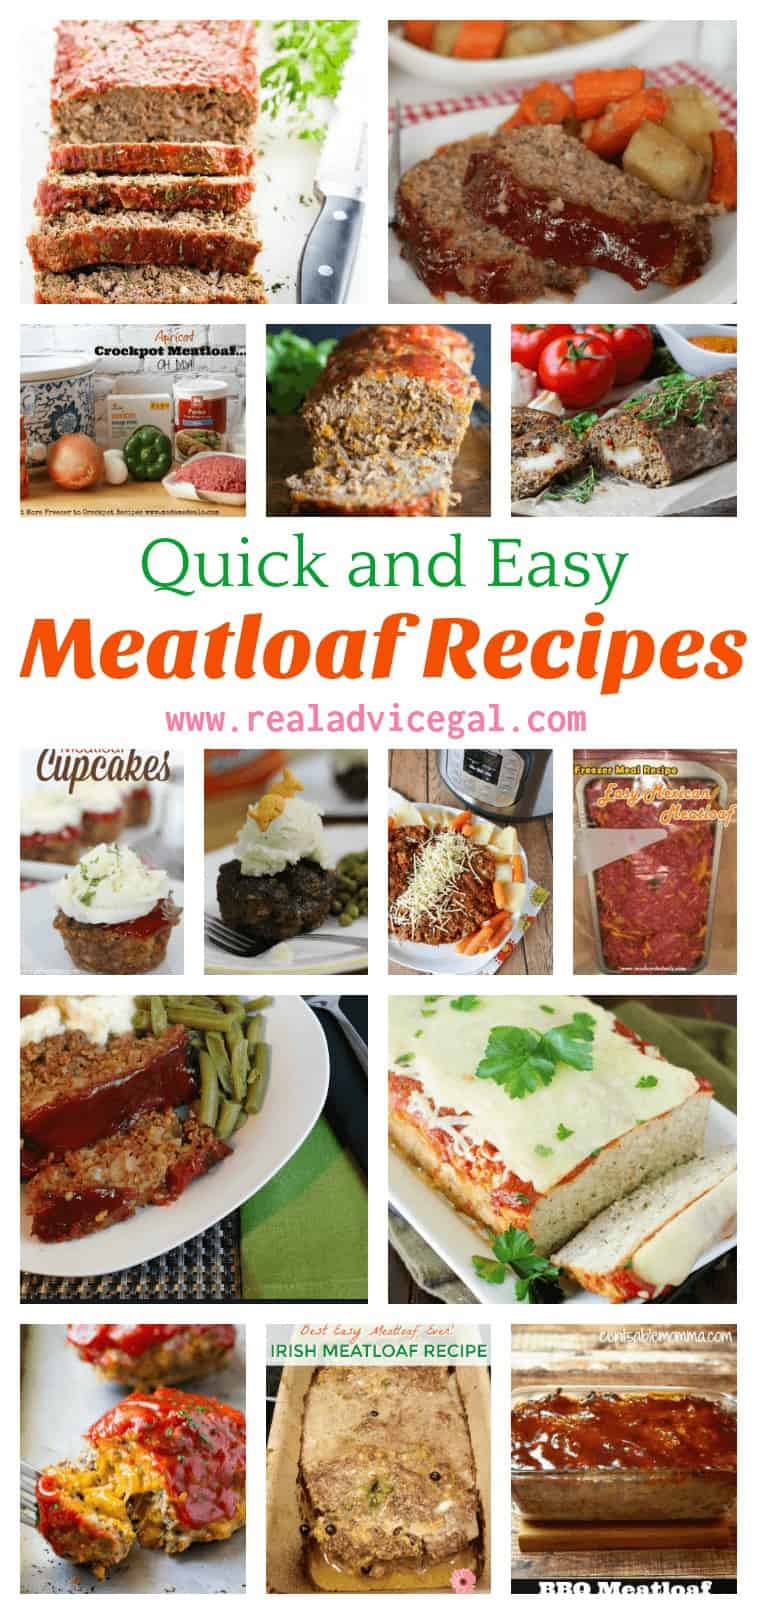 Is meatloaf your comfort food? Try these quick meatloaf recipes that are easy to make and so tasty. It's perfect for making special meal or for holiday dinner.